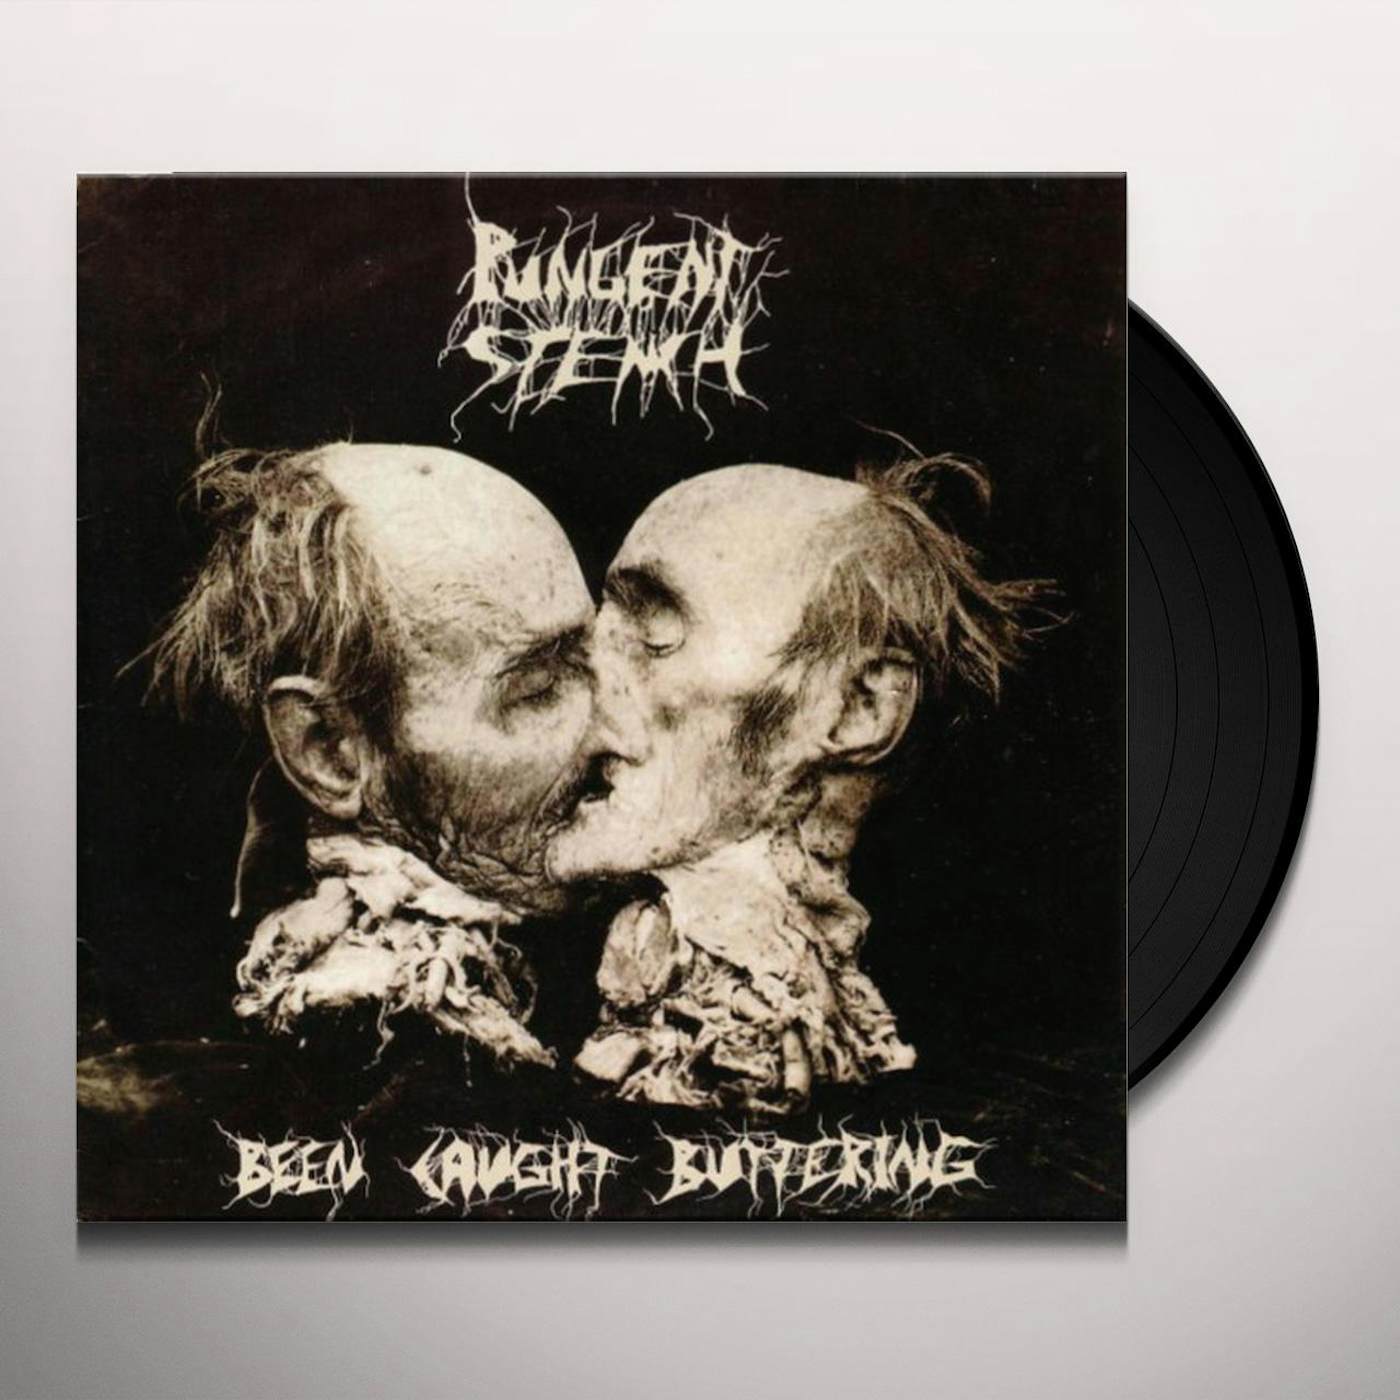 Pungent Stench BEEN CAUGHT BUTTERING Vinyl Record